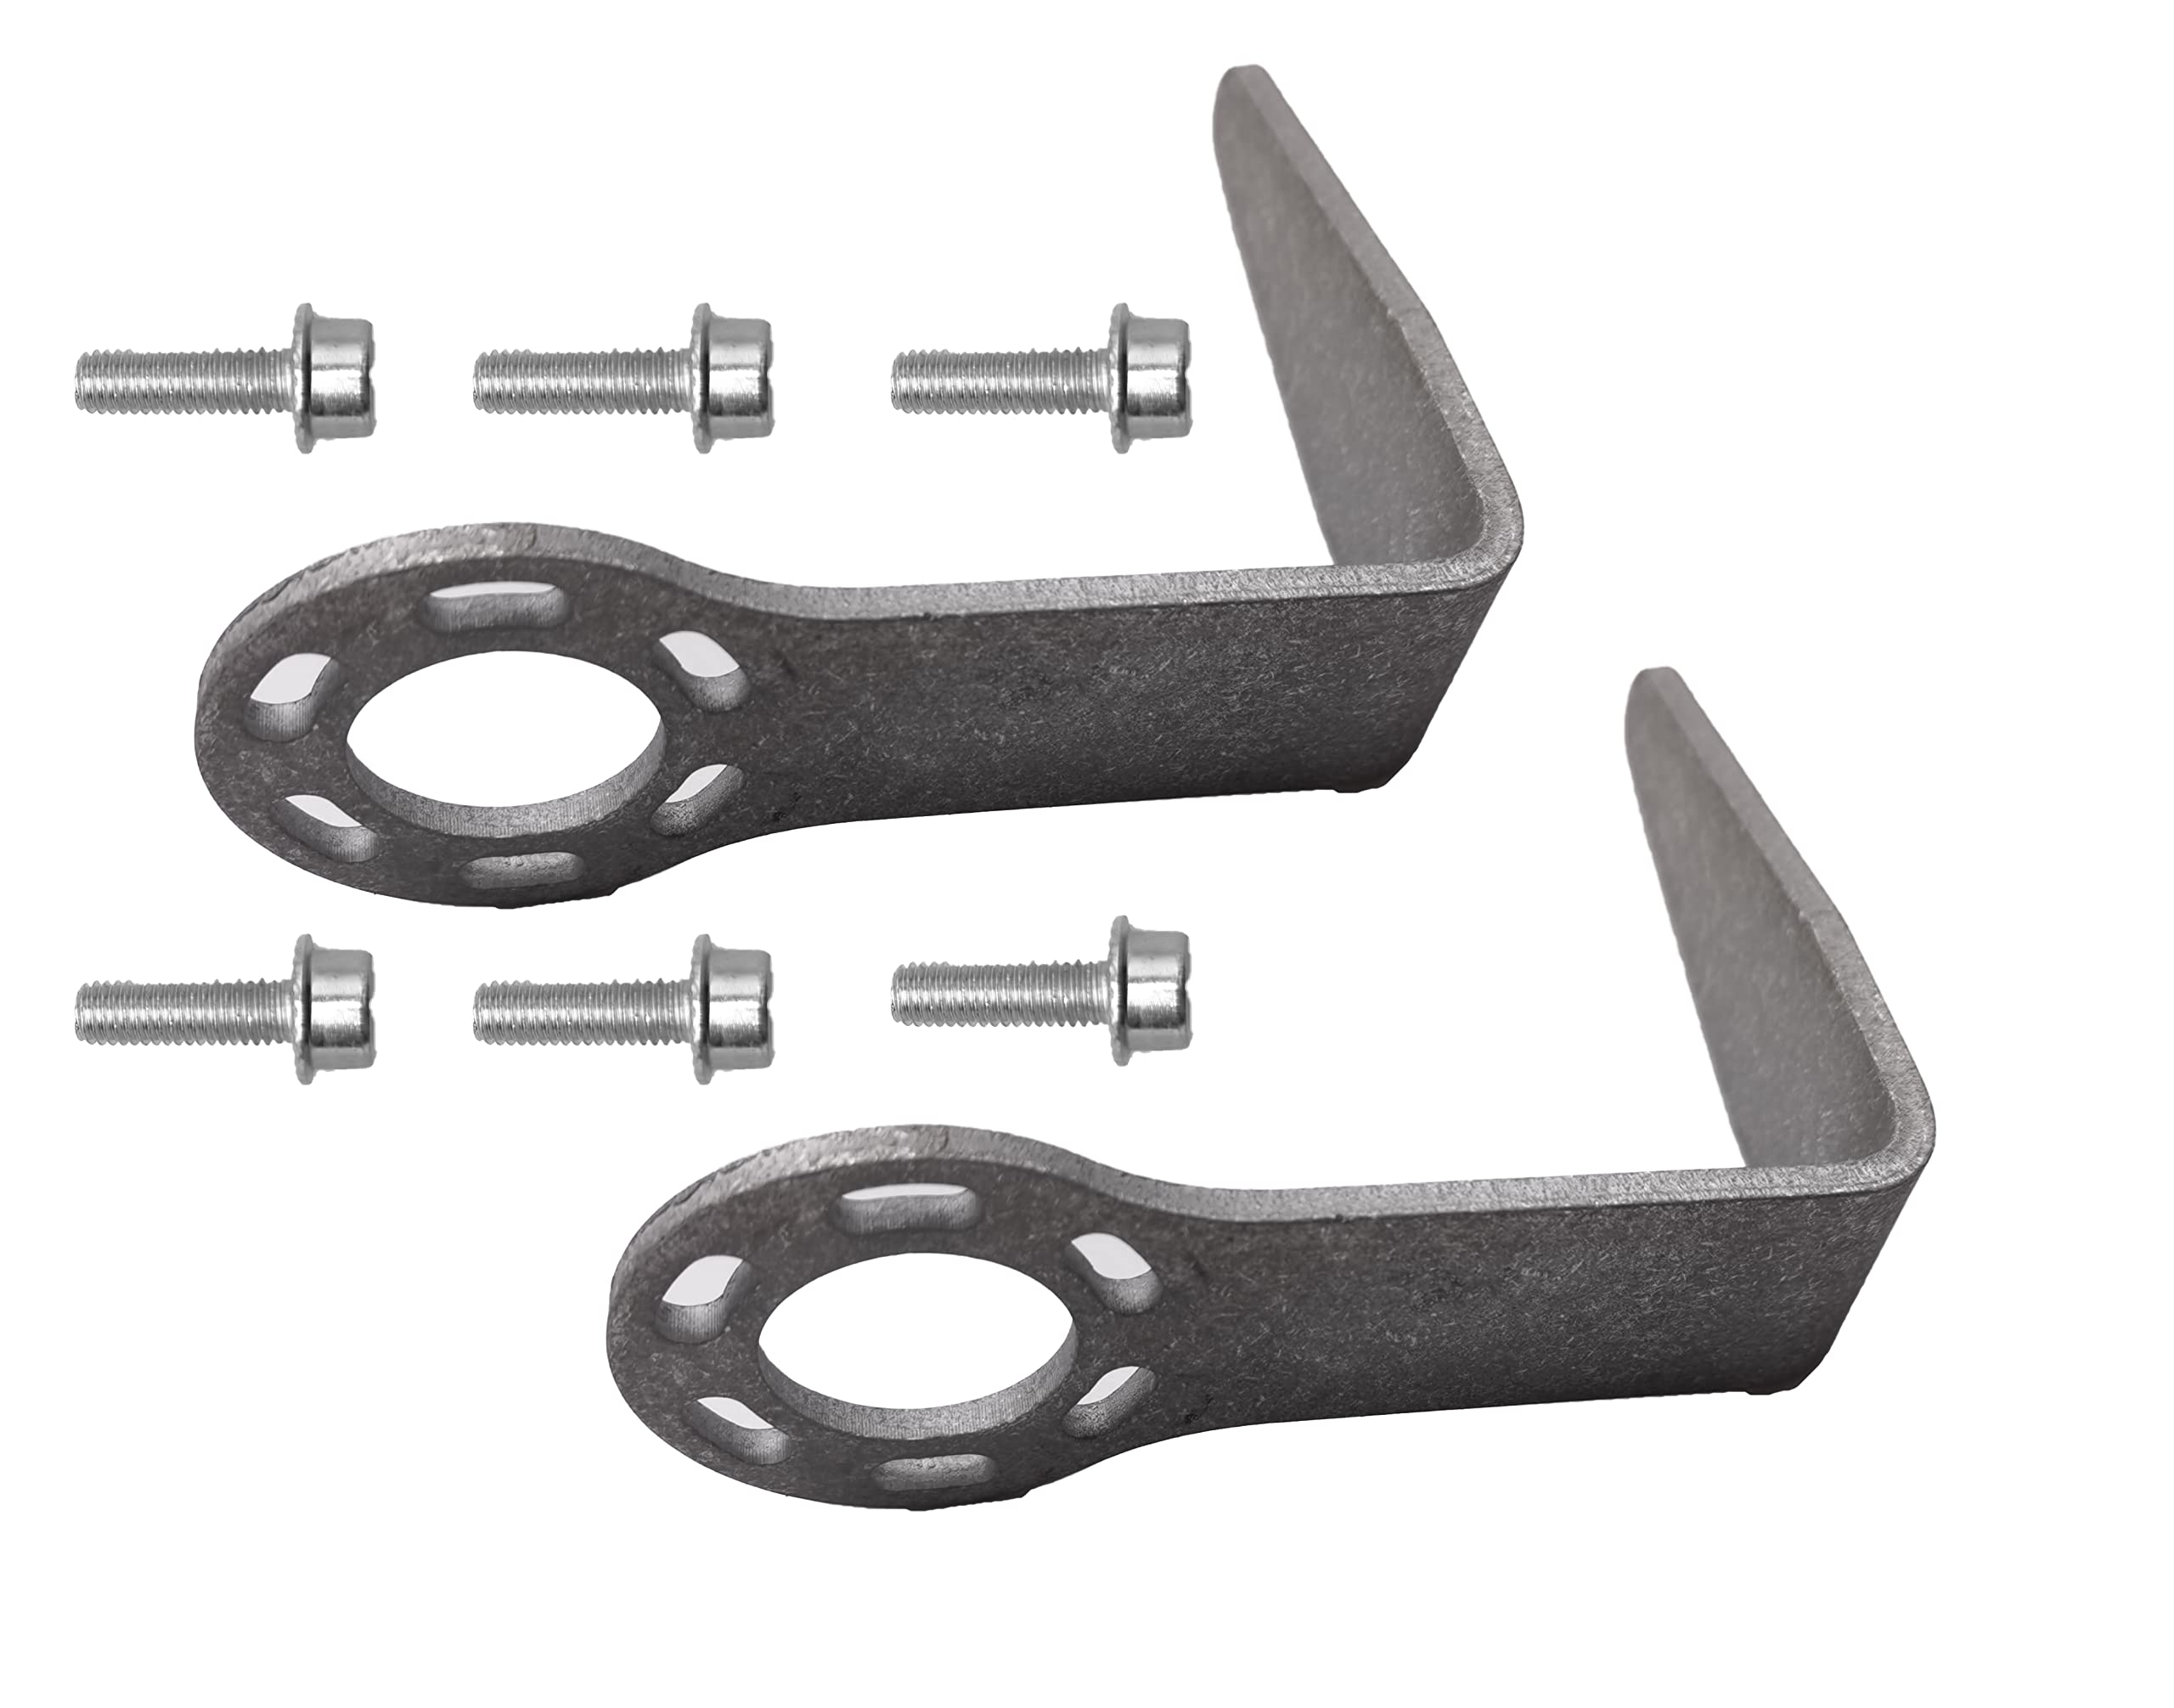 sanbaiyi 2 pack Grade Aluminum Rafter Hook 889661M with free bolt for Hitachi metabo NR83A5(S), NR83AA5, NV83A5, NR90AC5, NT65A5 and NV75A5 Framing Nailers